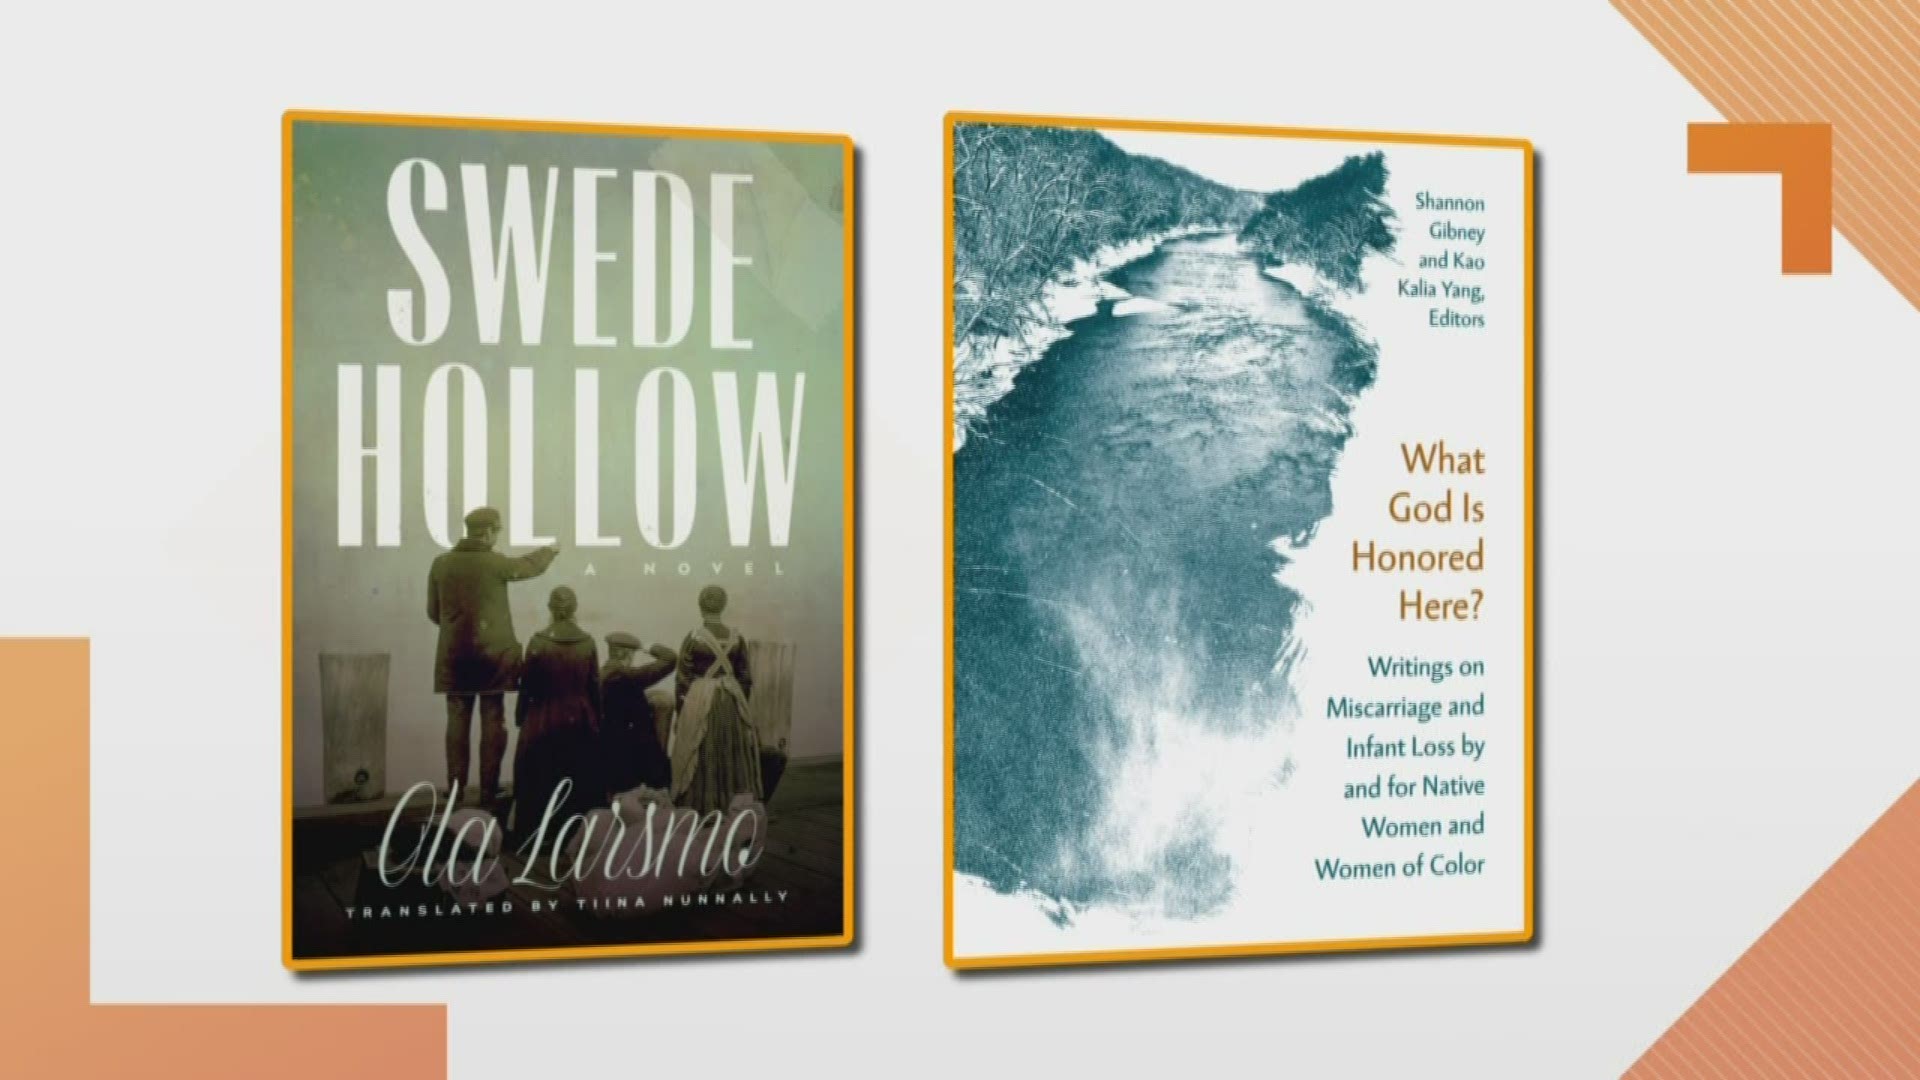 What are you reading this fall? University of Minnesota Press editor Erik Anderson shares two wonderful new October releases for avid readers.